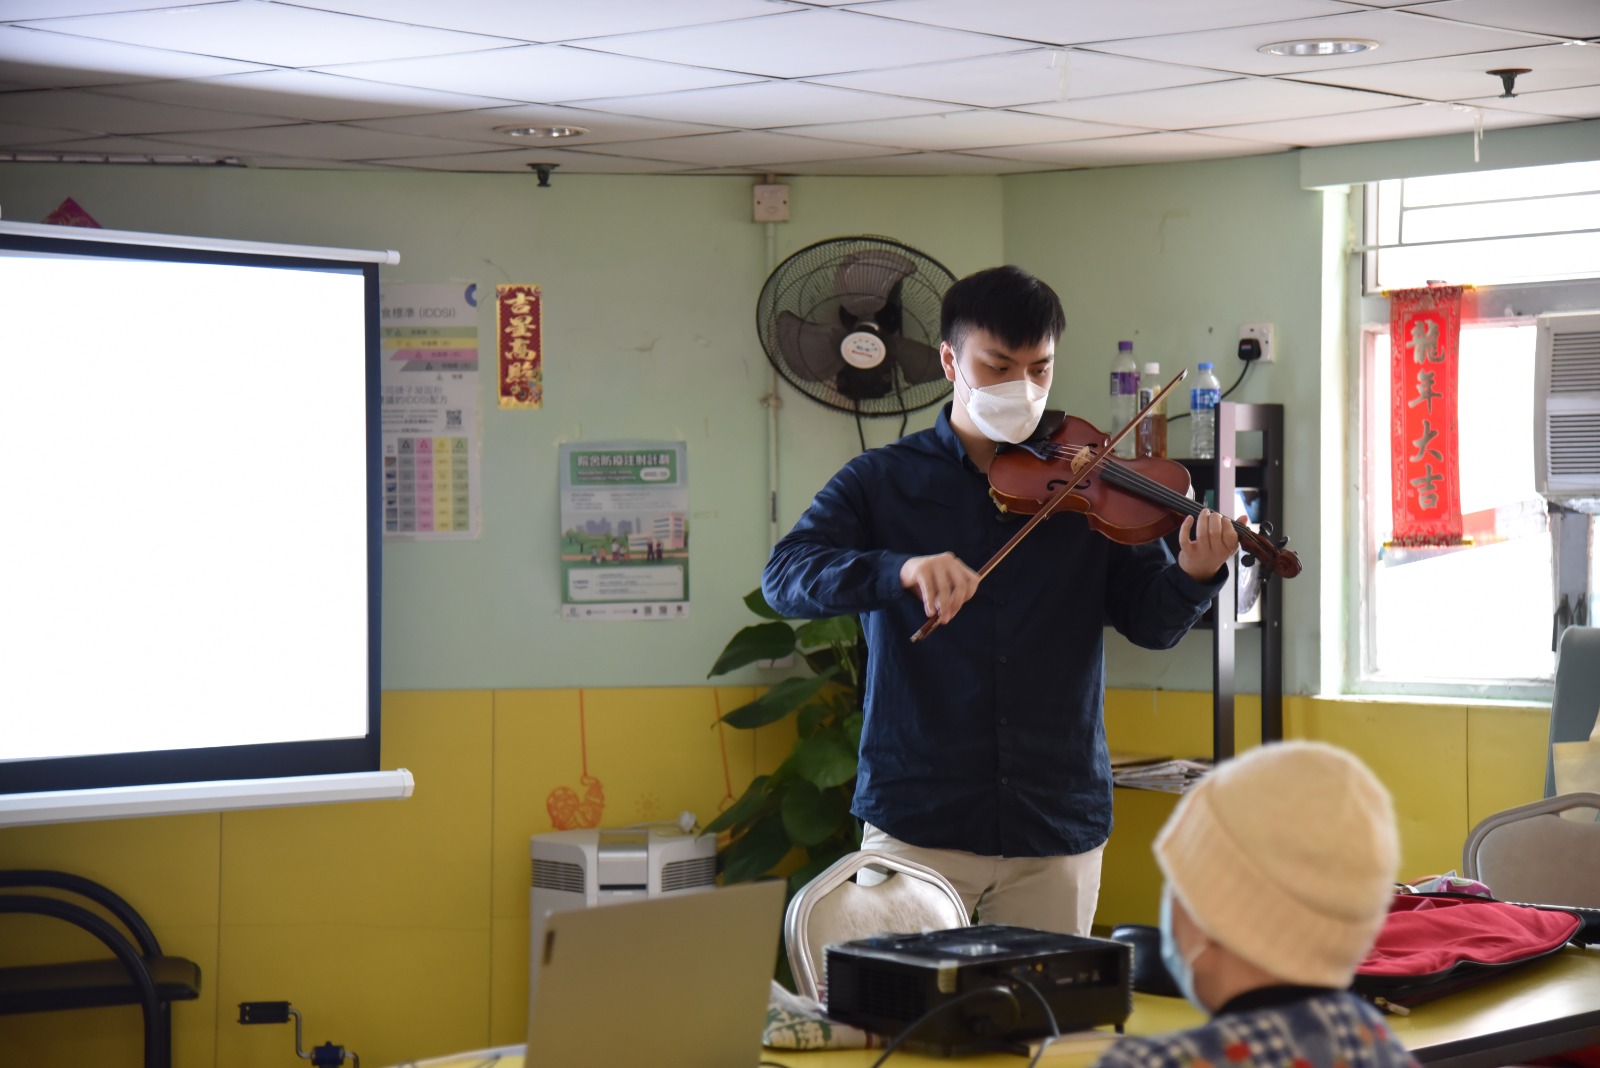 Staff playing the violin for the elderly